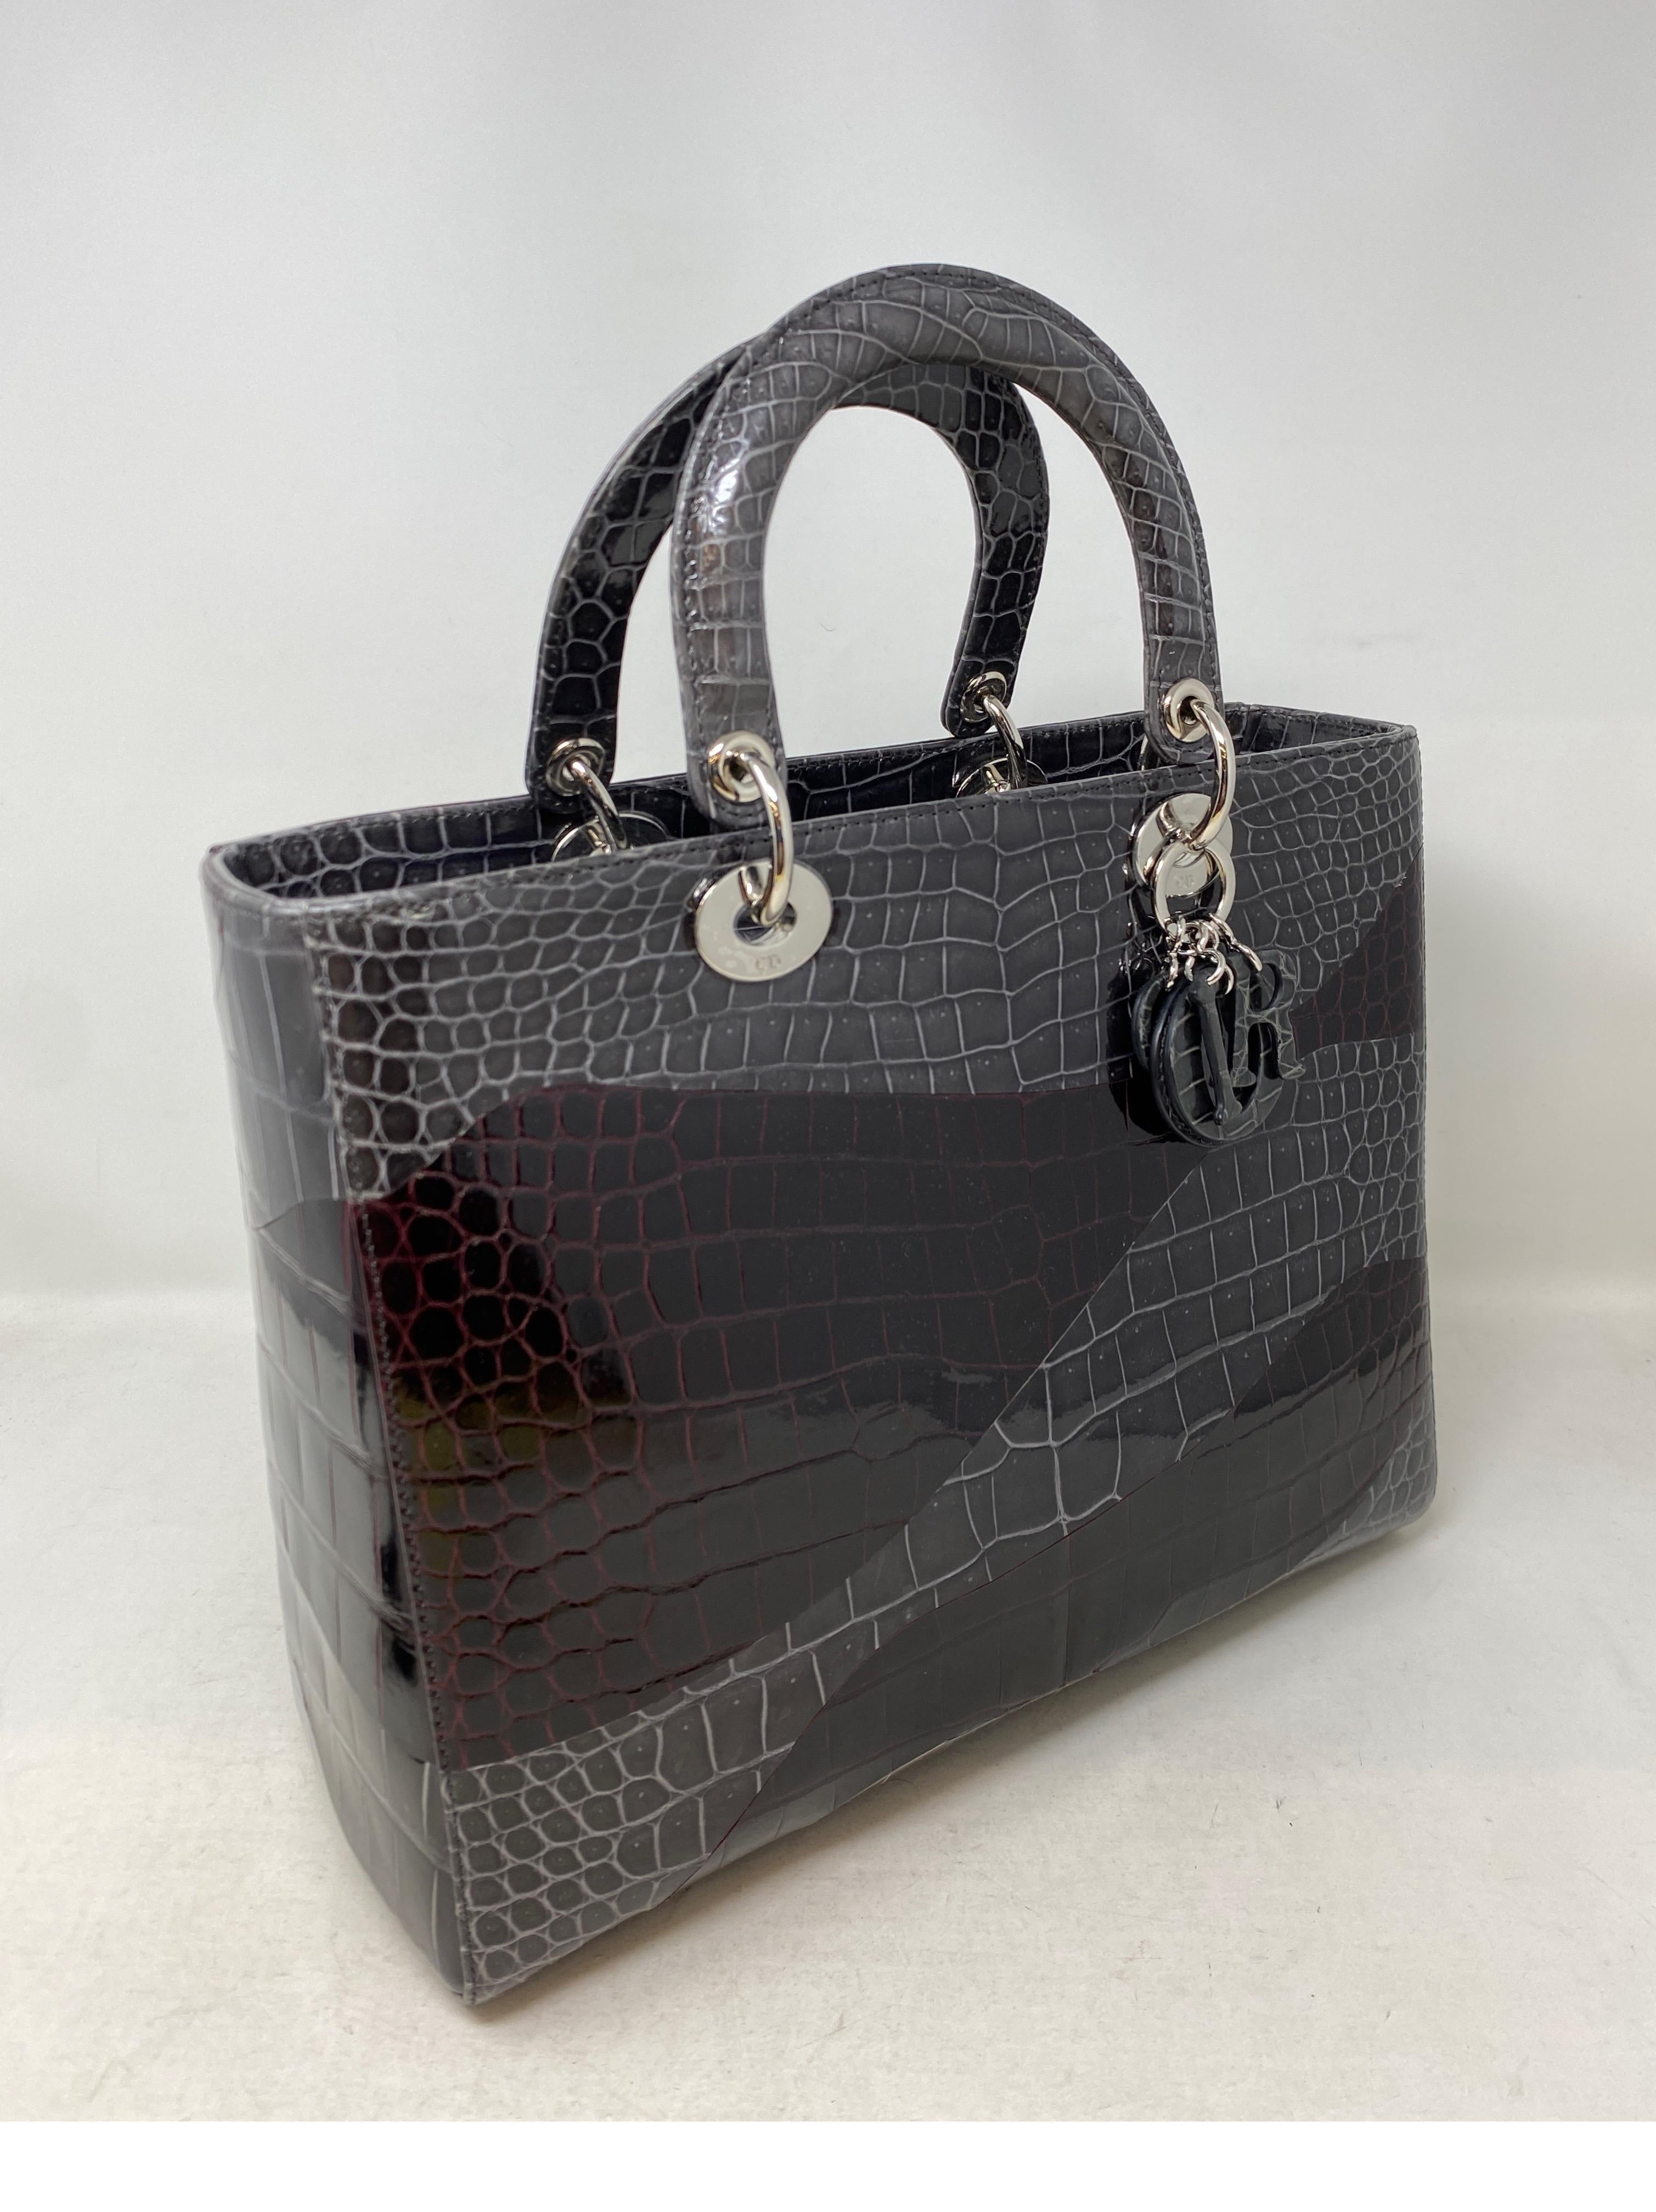 Christian Dior Dark Brown And Grey Crocodile Bag. Mint like new condition. Bag was never used. Rare crocodile bag. Unique design. Only a few were made. Don't miss out on this opportunity to own a one of a kind piece. Large Lady Dior Bag with exotic